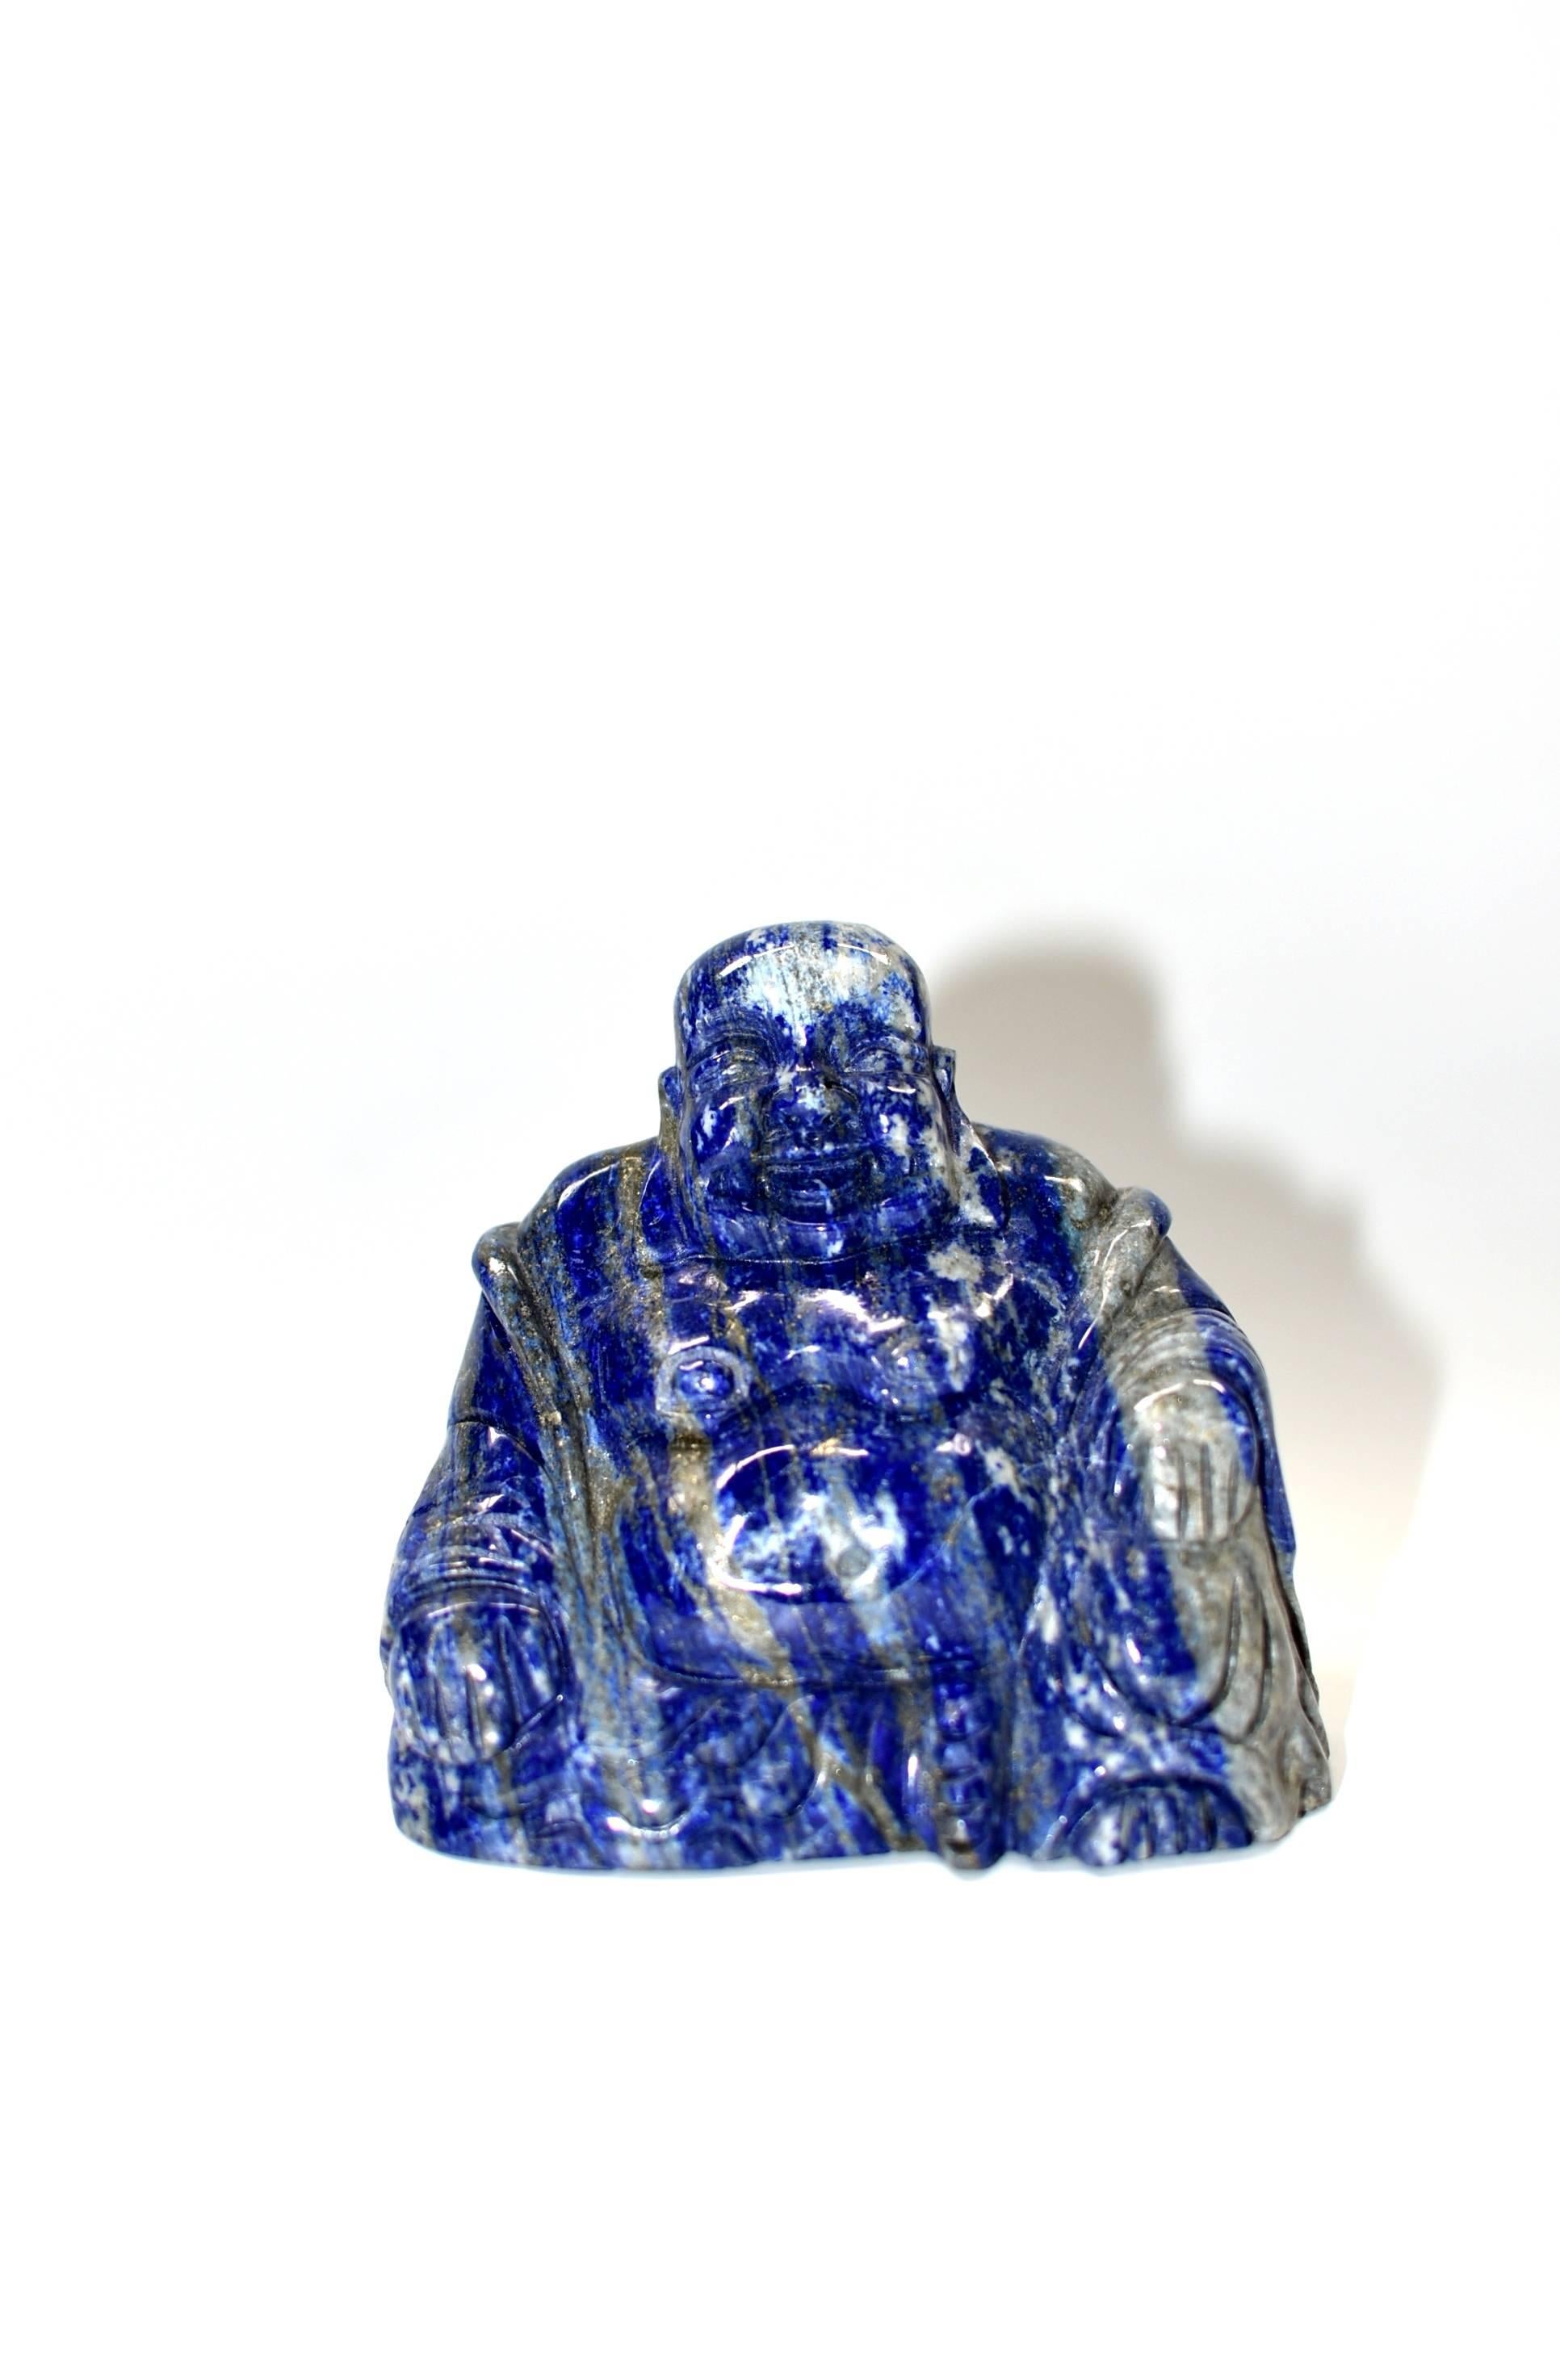 All natural Lapis happy Buddha, hand-carved. Besides the brilliant, saturated, signature blue, this piece has beautiful glittering of gold. The great contrast of the gold against the saturated blue has a stunning visual effect. Happy Buddha is a